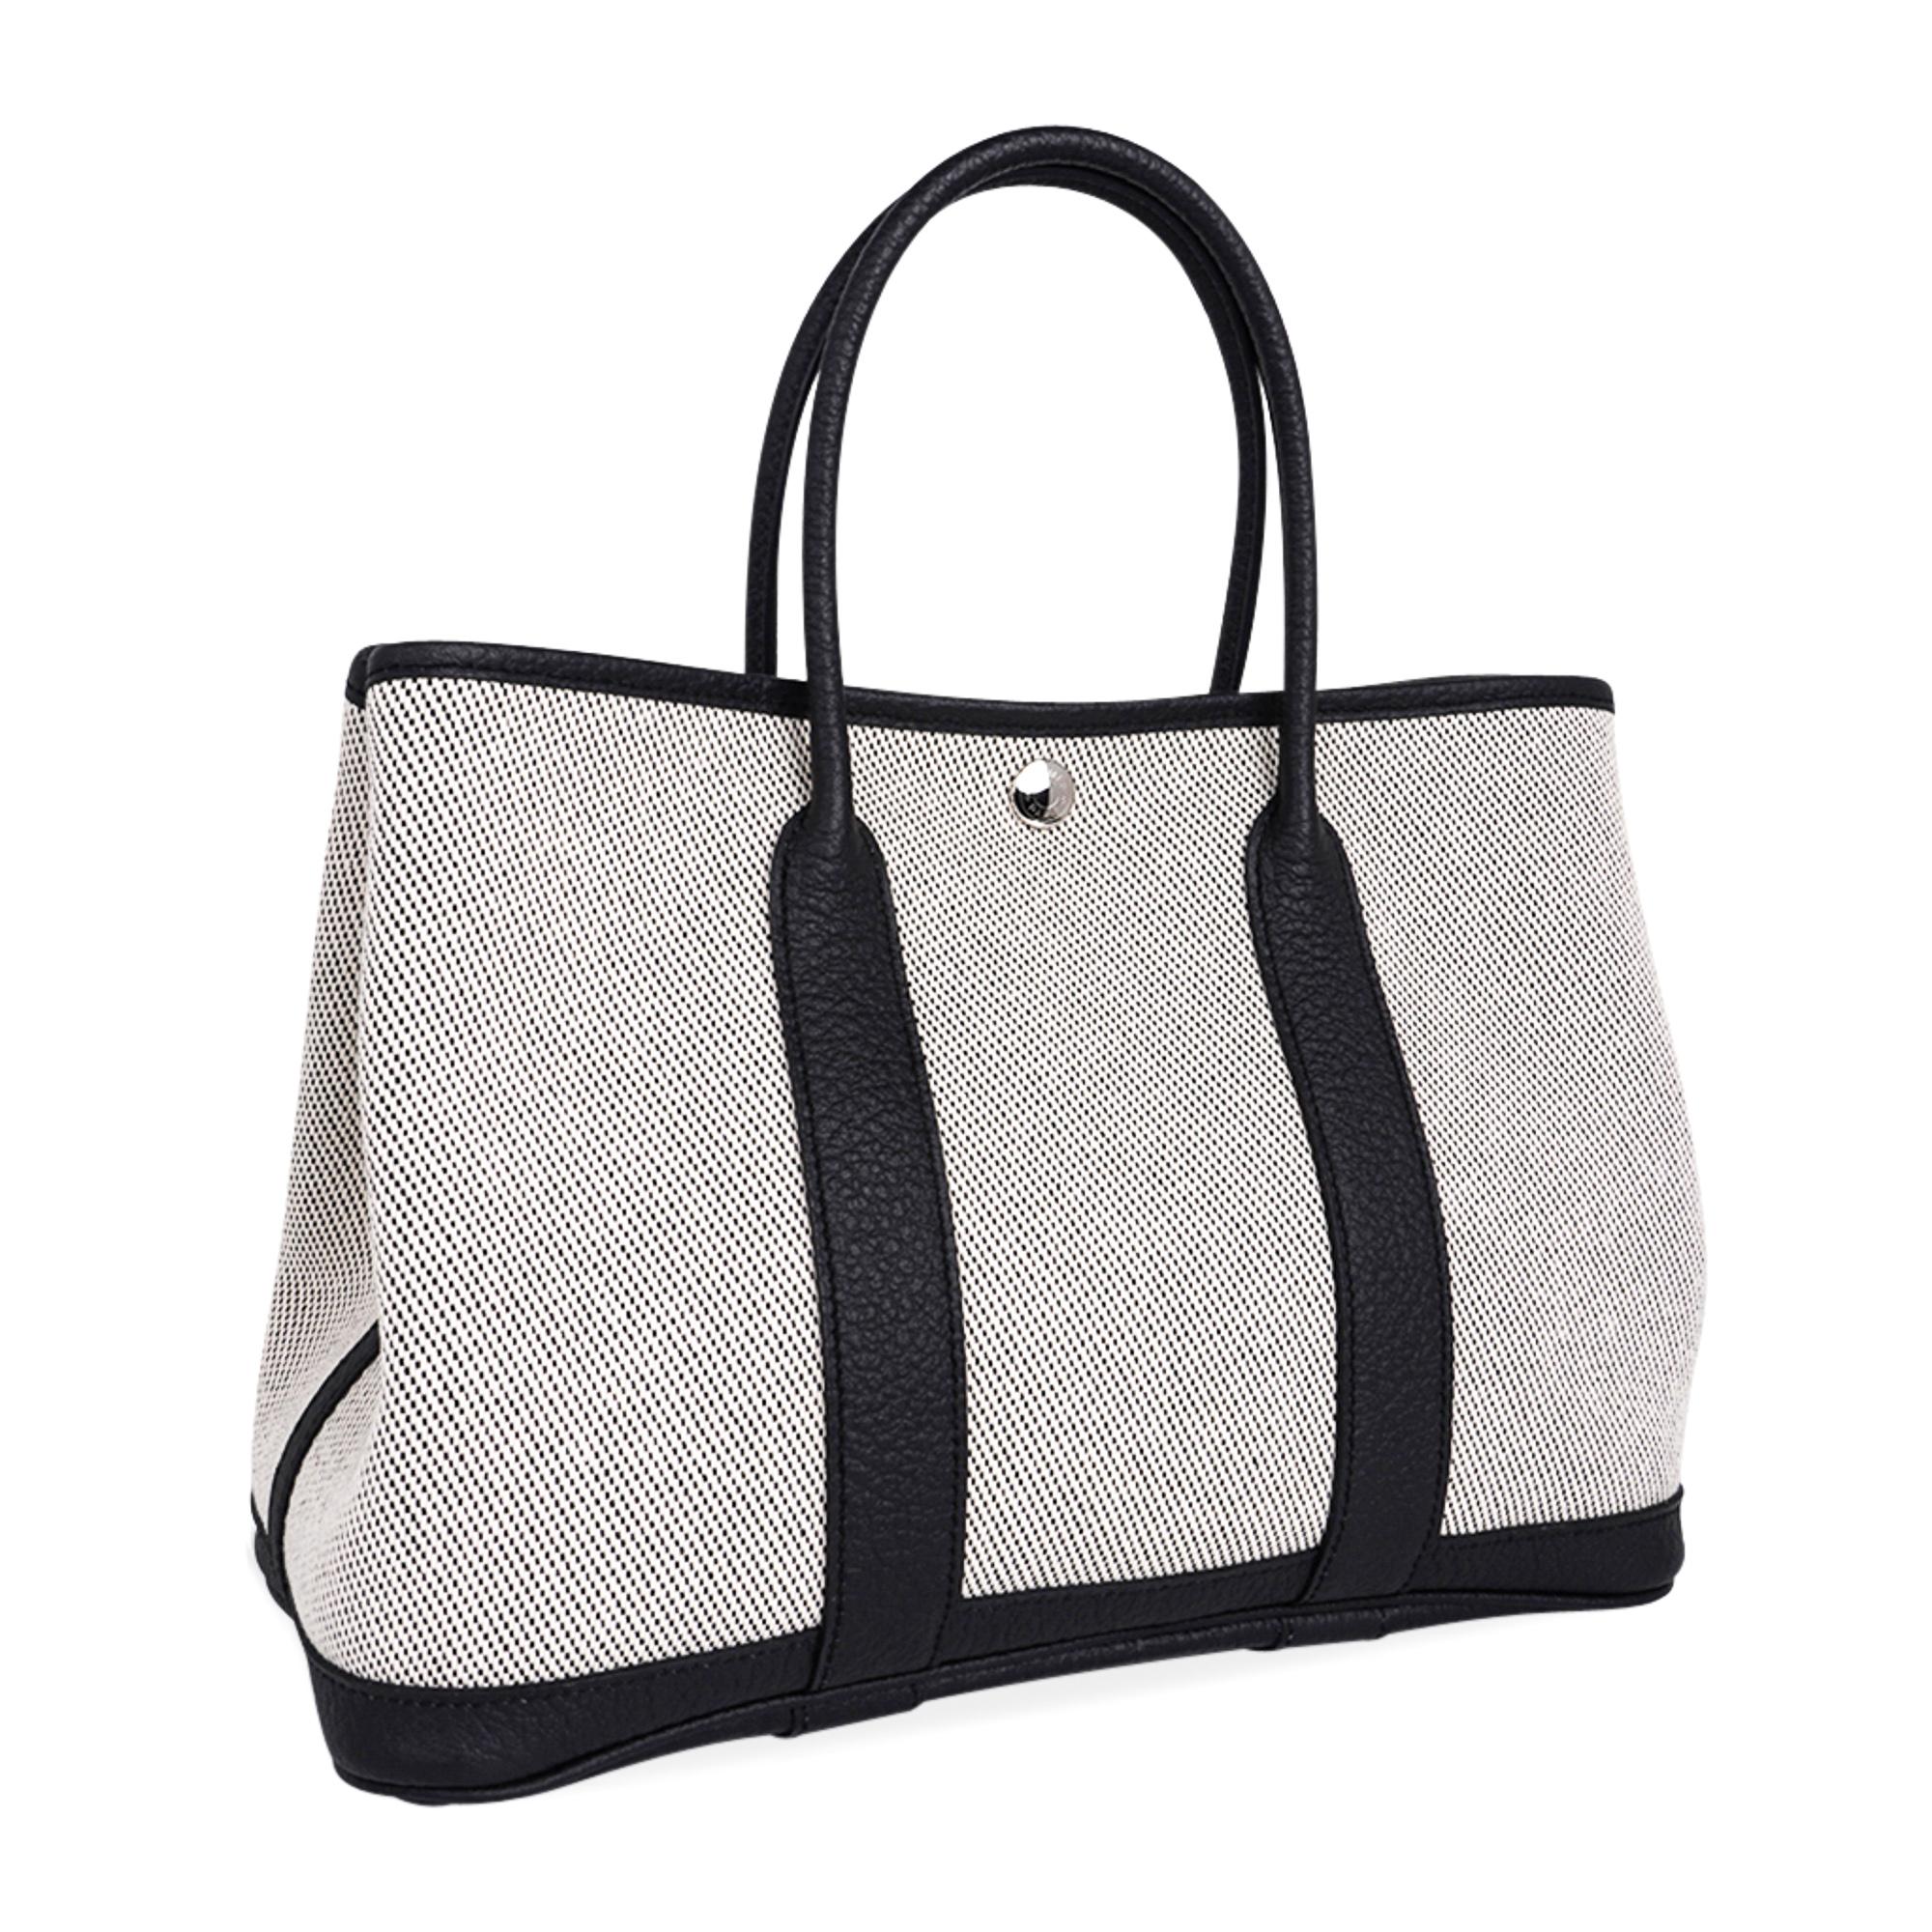 Mightychic offers a guaranteed authentic Hermes Garden Party 30 bag featured in Criss Cross Noir and Ecru Toile with Vache Country leather.
This crisp and fresh Garden Party 30 tote bag is the perfect about town tote. 
Durable and strong toile